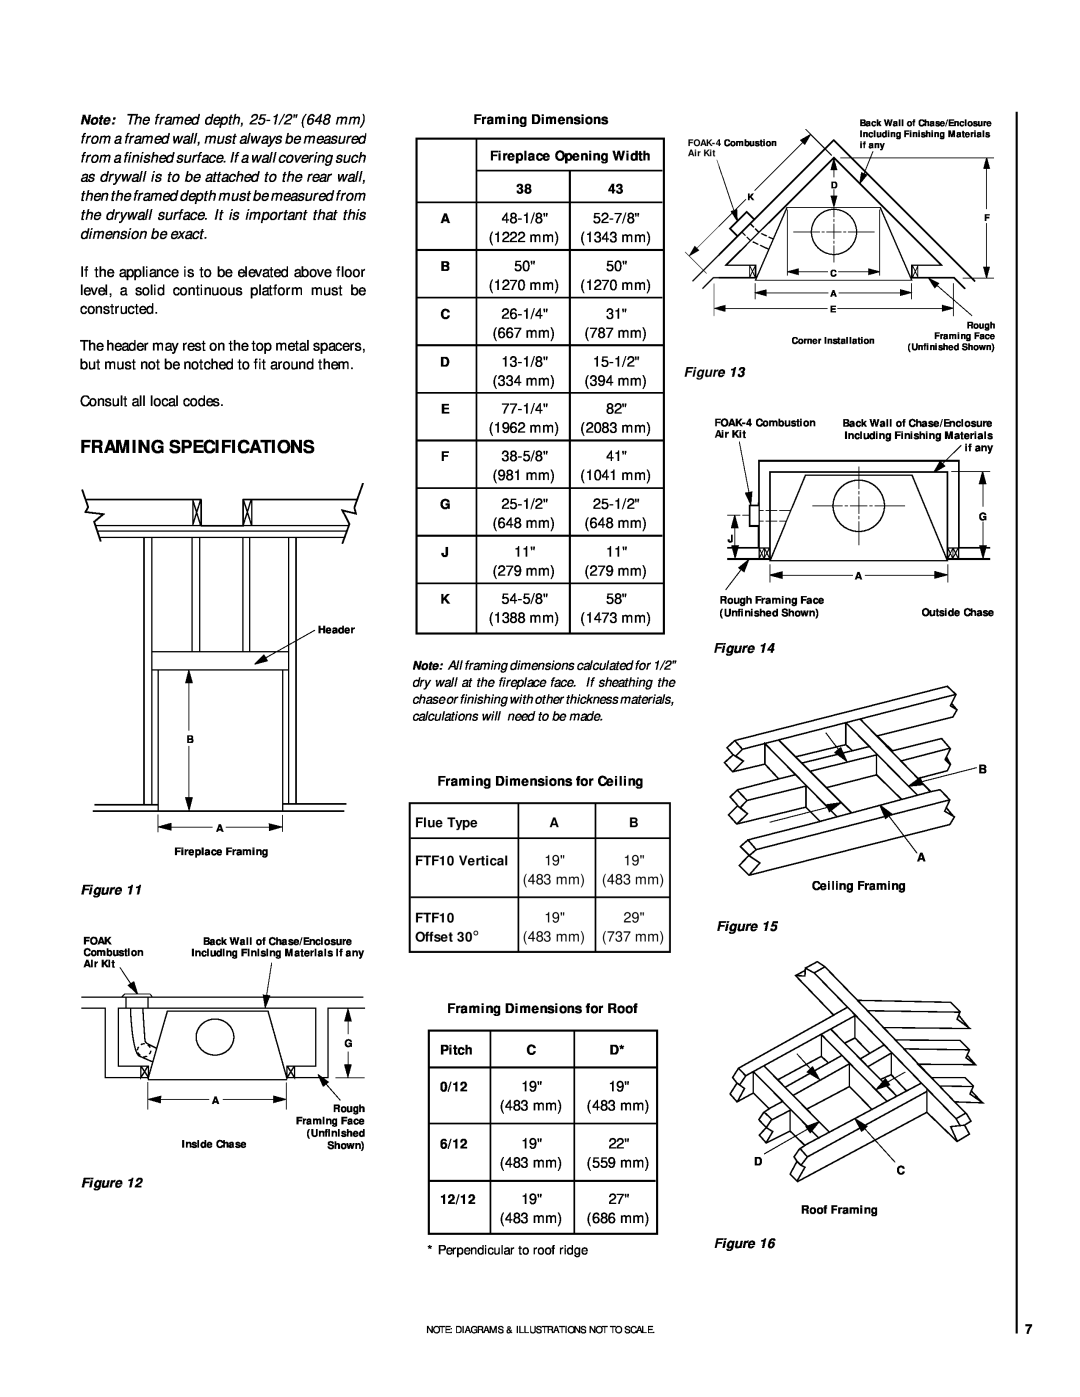 Lennox Hearth LBC-4324 Framing Specifications, Framing Dimensions for Ceiling, Flue Type, FTF10 Vertical, Pitch, 0/12 